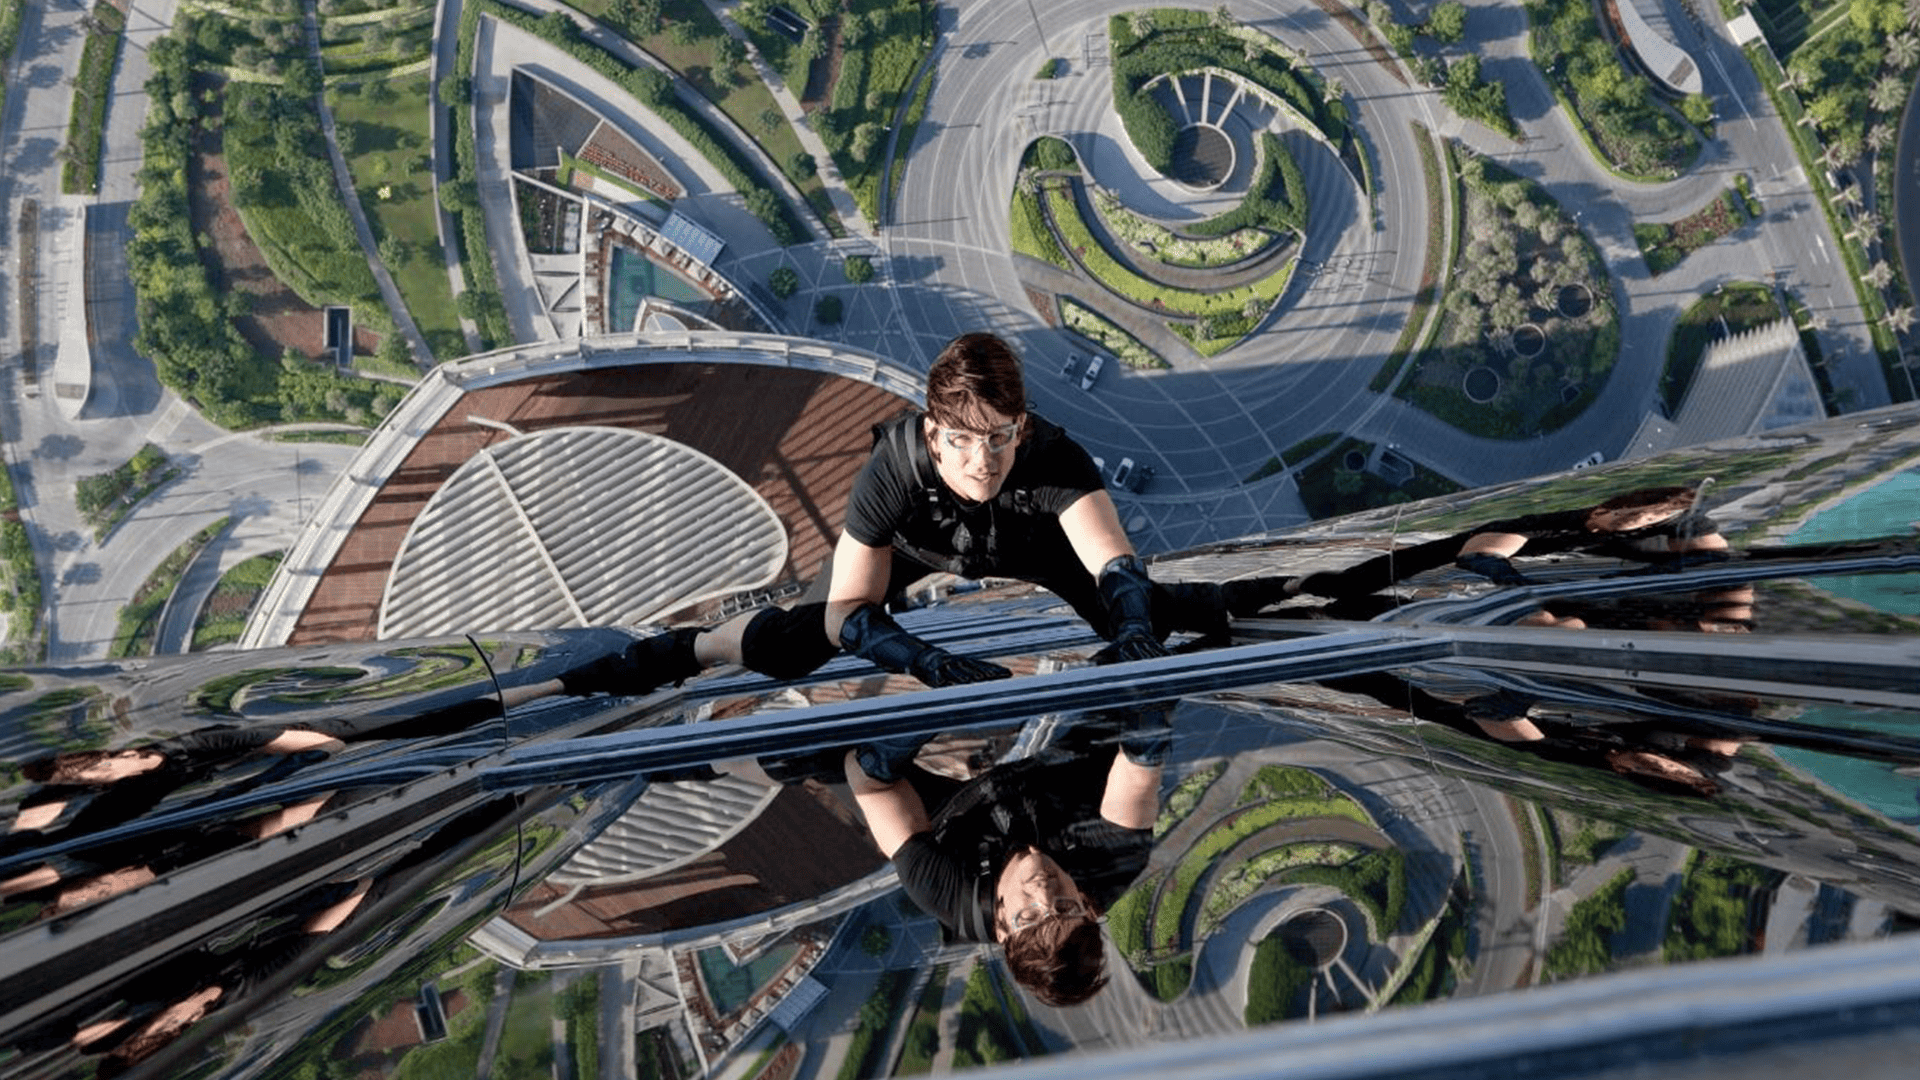 Tom Cruise scales the Burj Khalifa in this image from Paramount Pictures